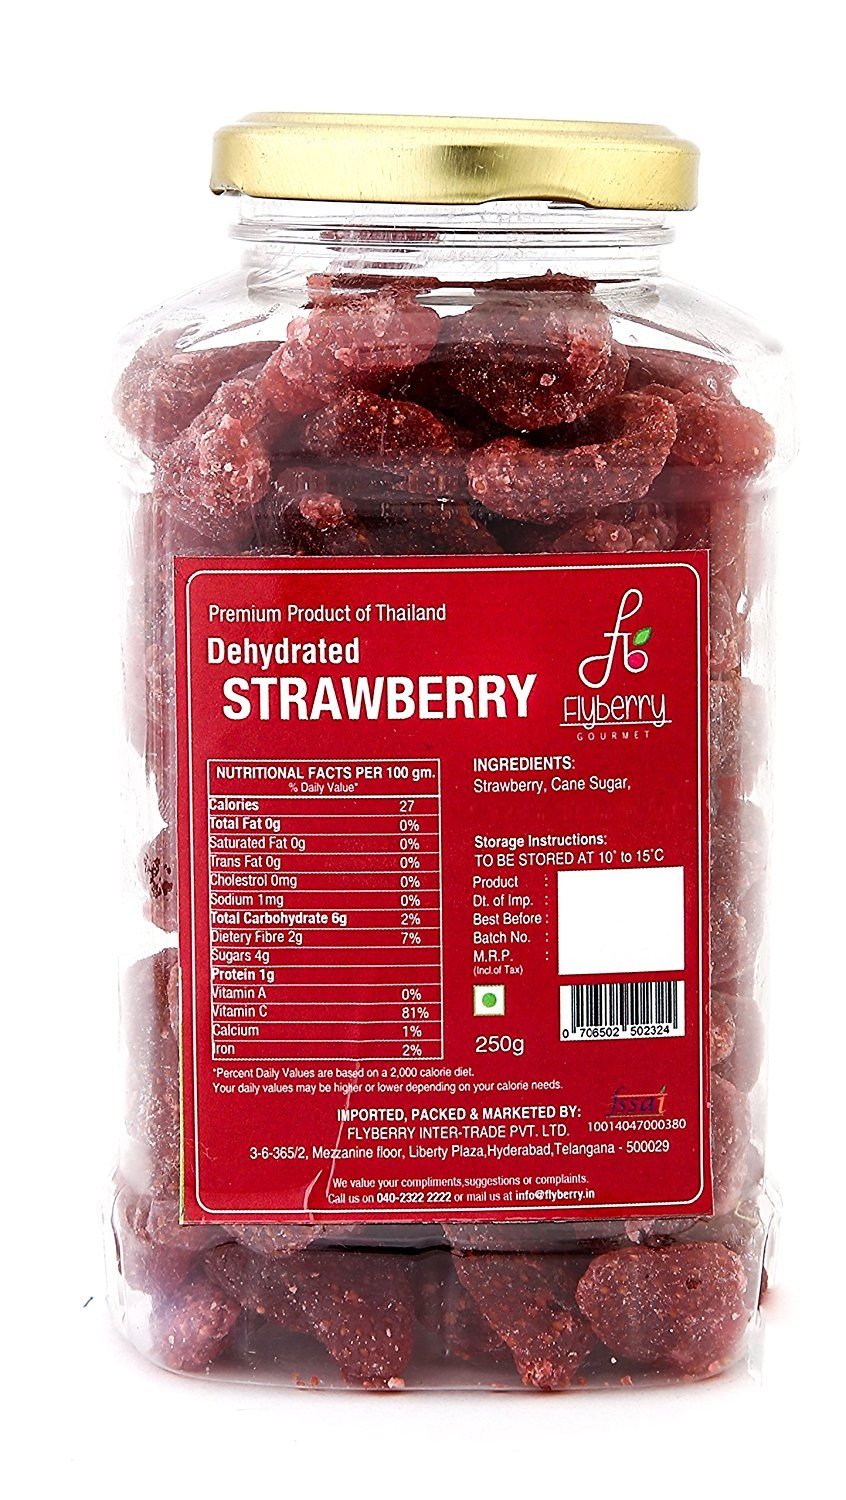 Flyberry Gourmet Dehydrated Strawberry Image